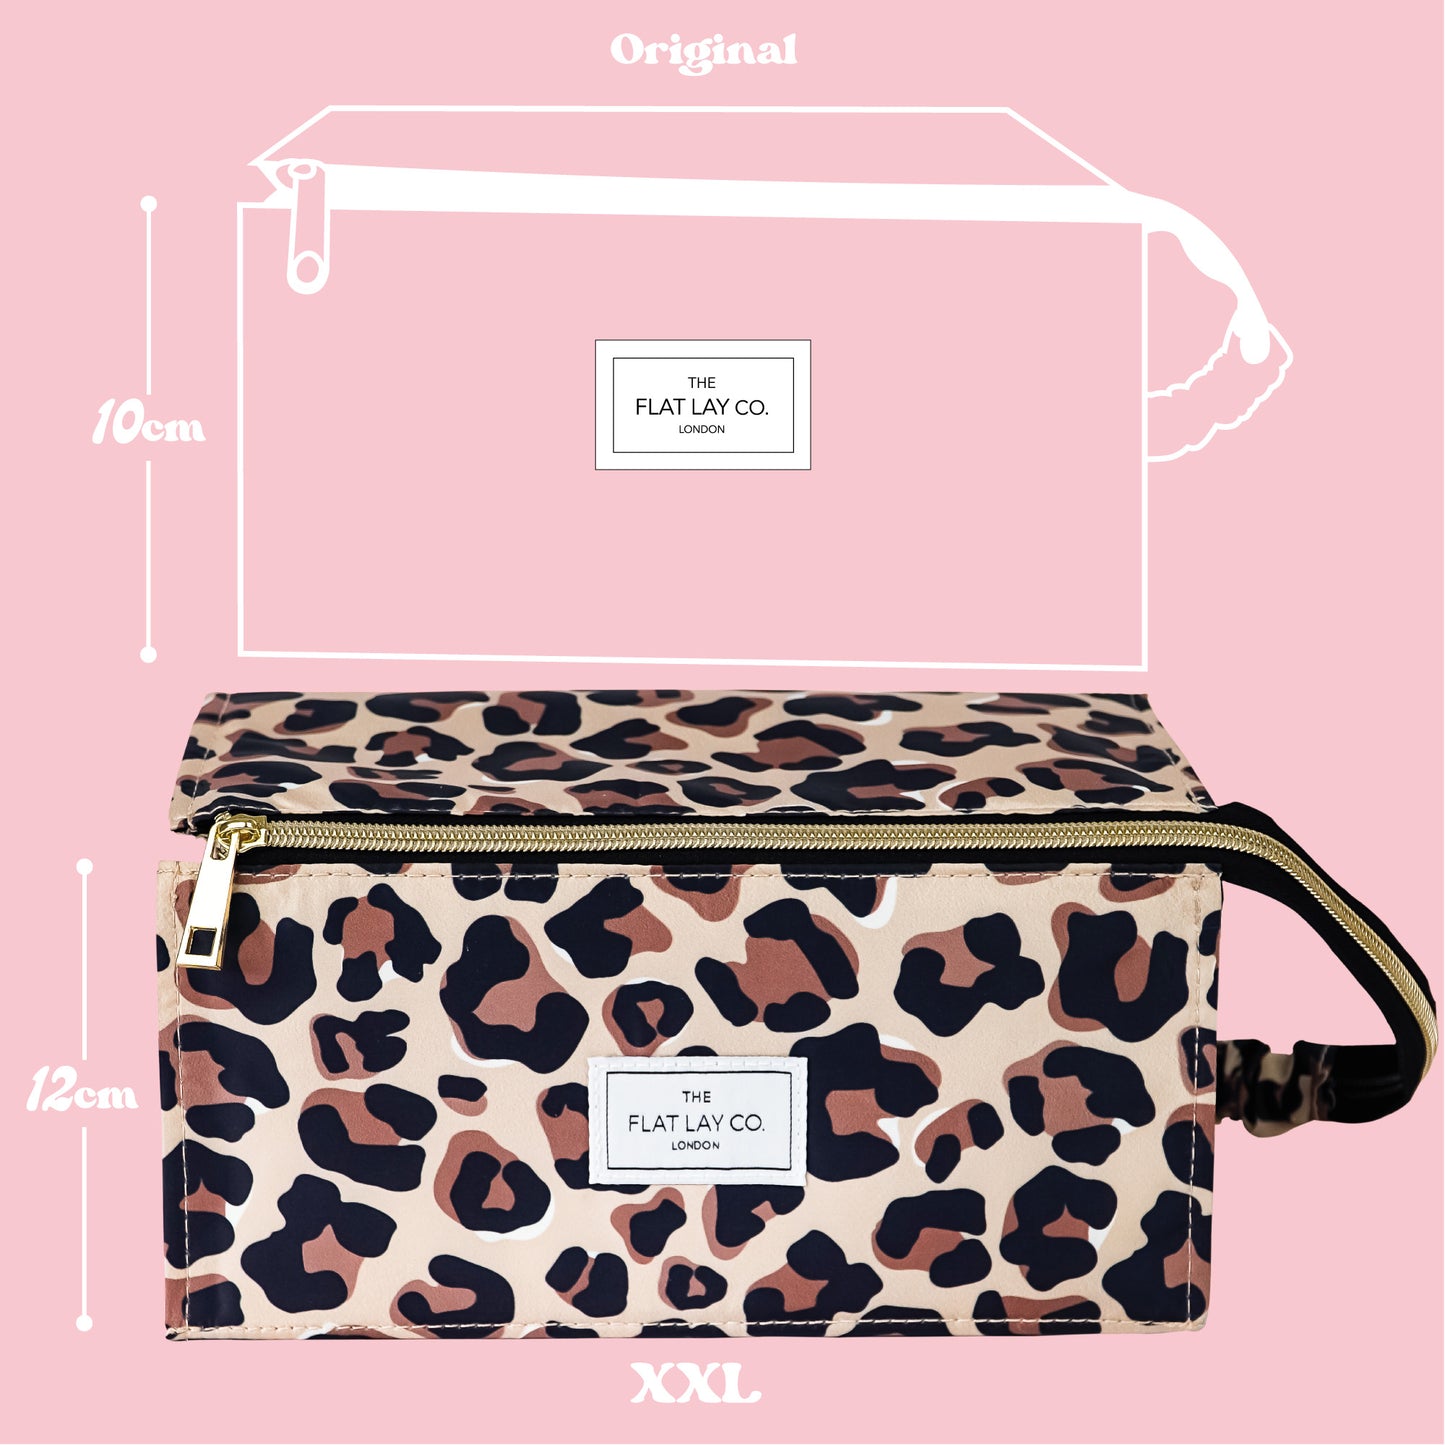 XXL Makeup Box Bag and Tray in Blush Pink